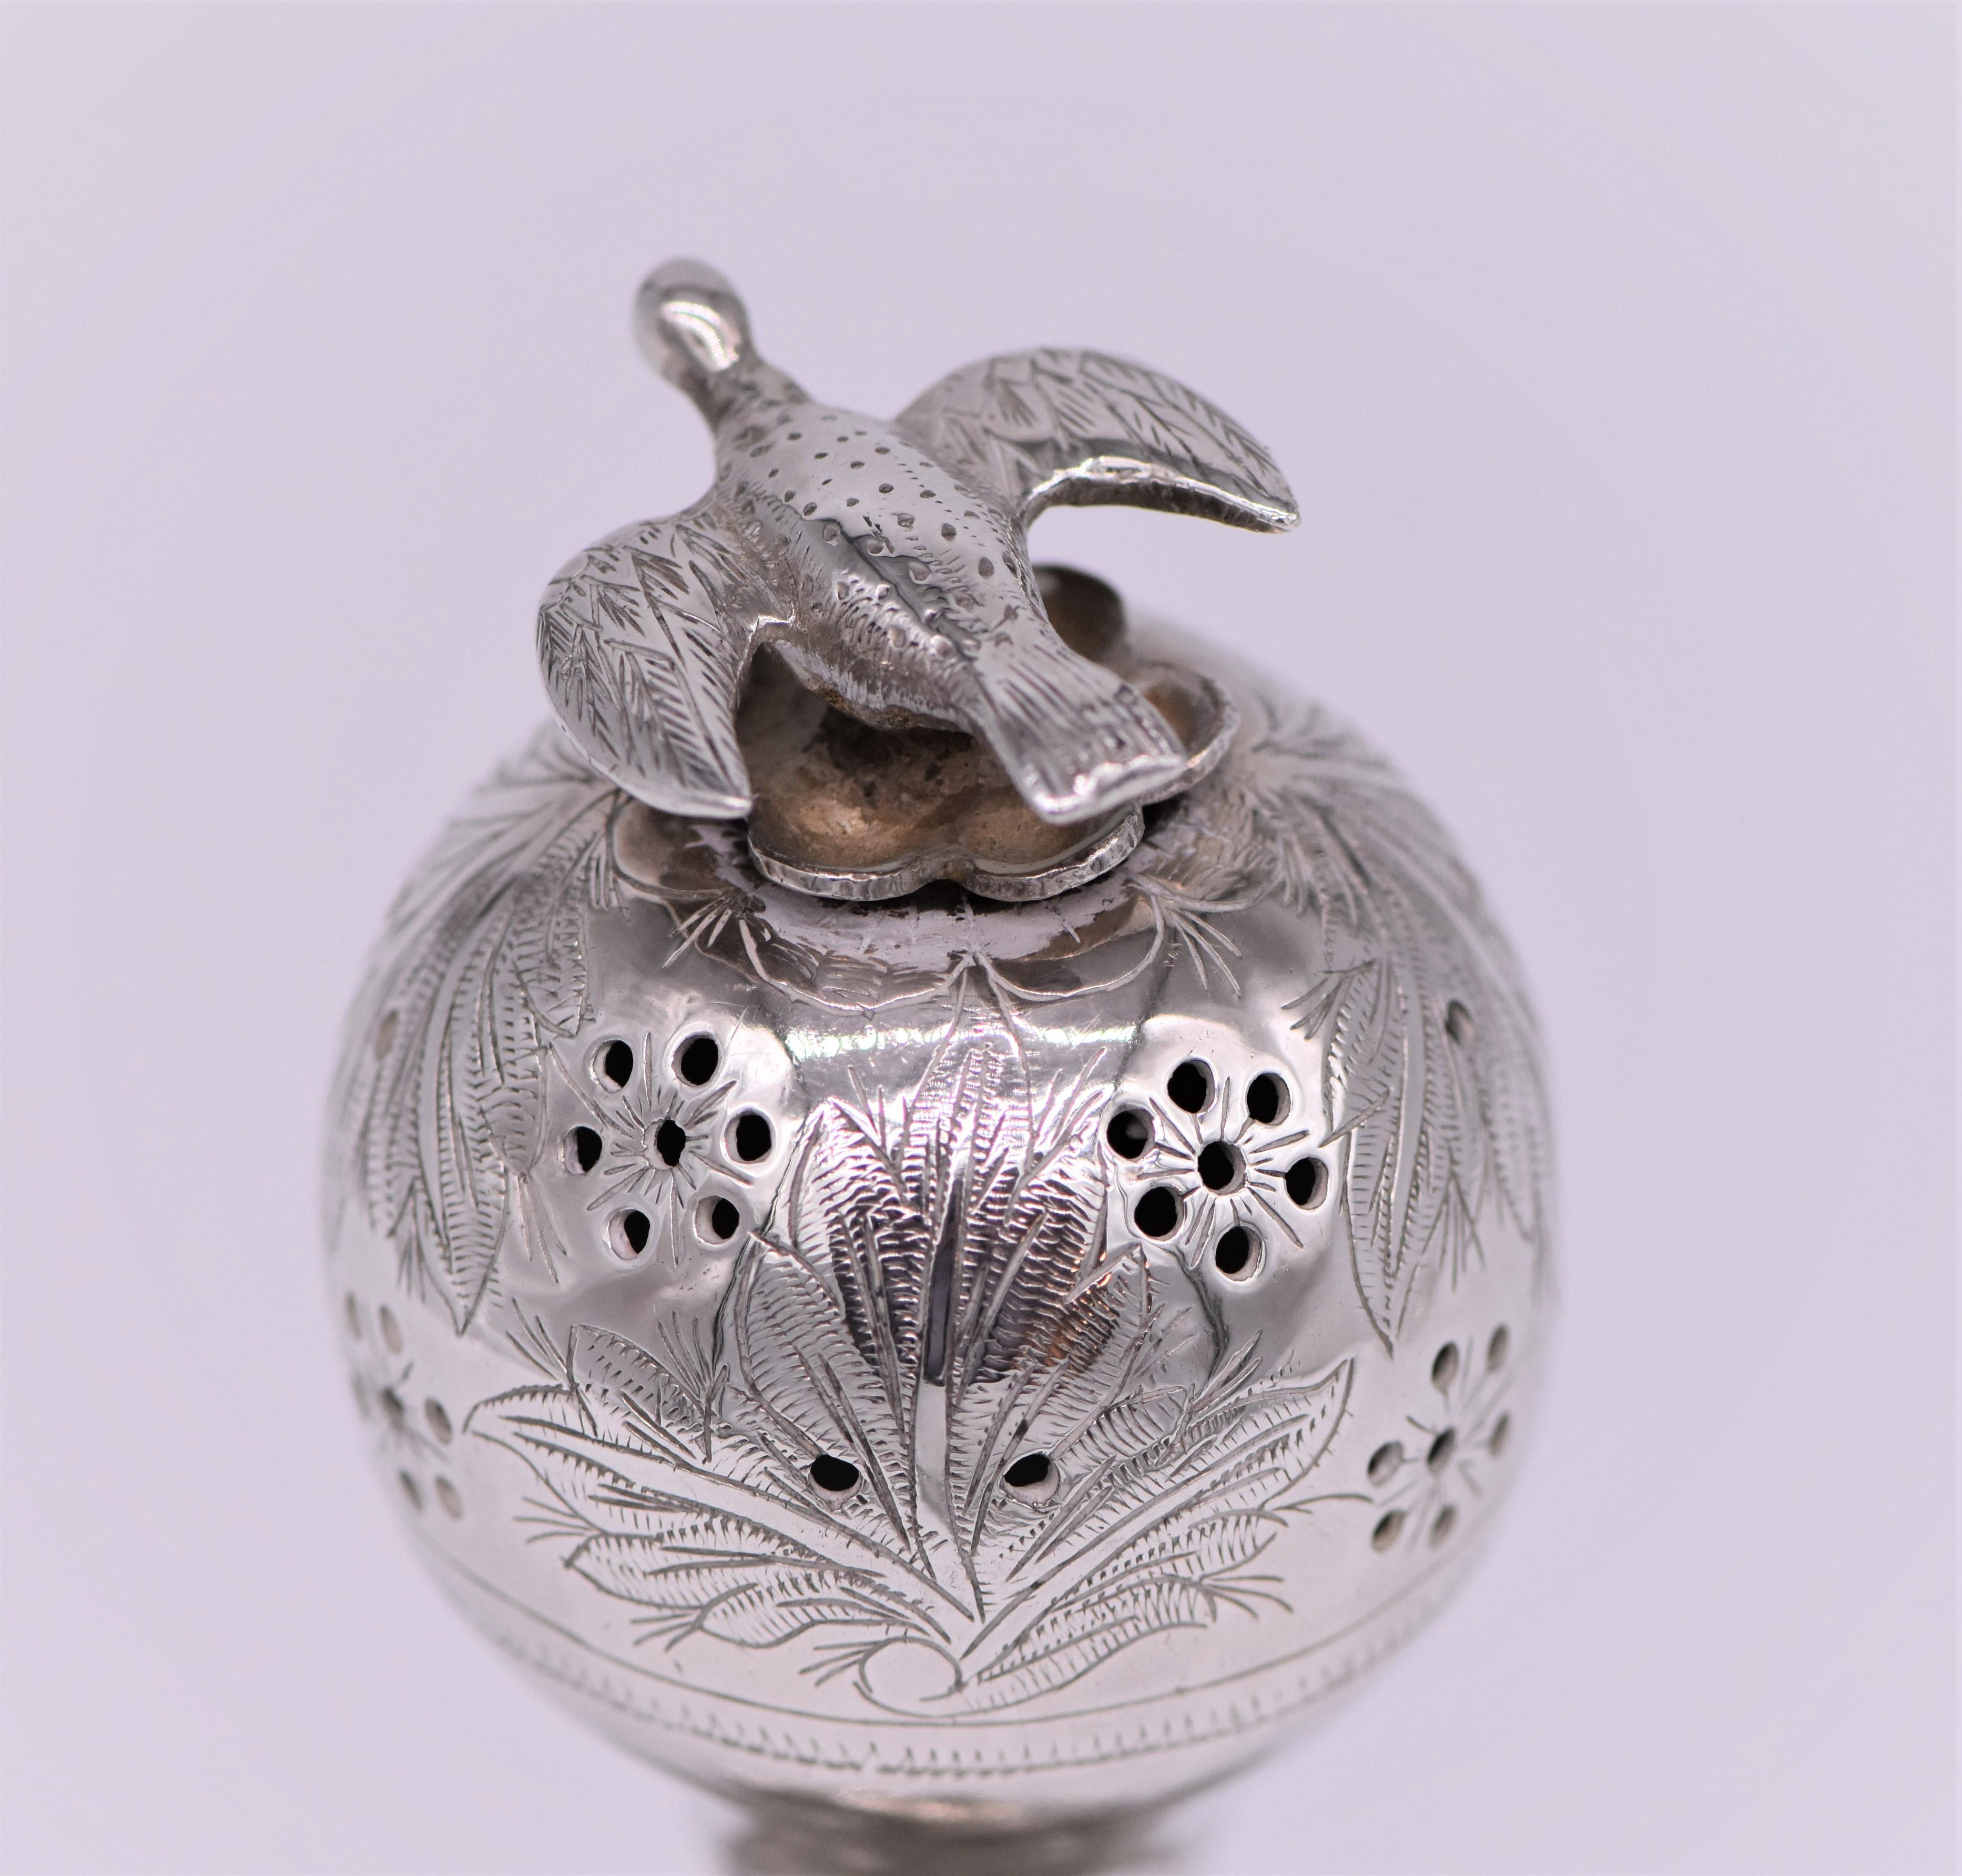 Hand-Crafted Late 19th Century Russian Empire Silver Spice Container